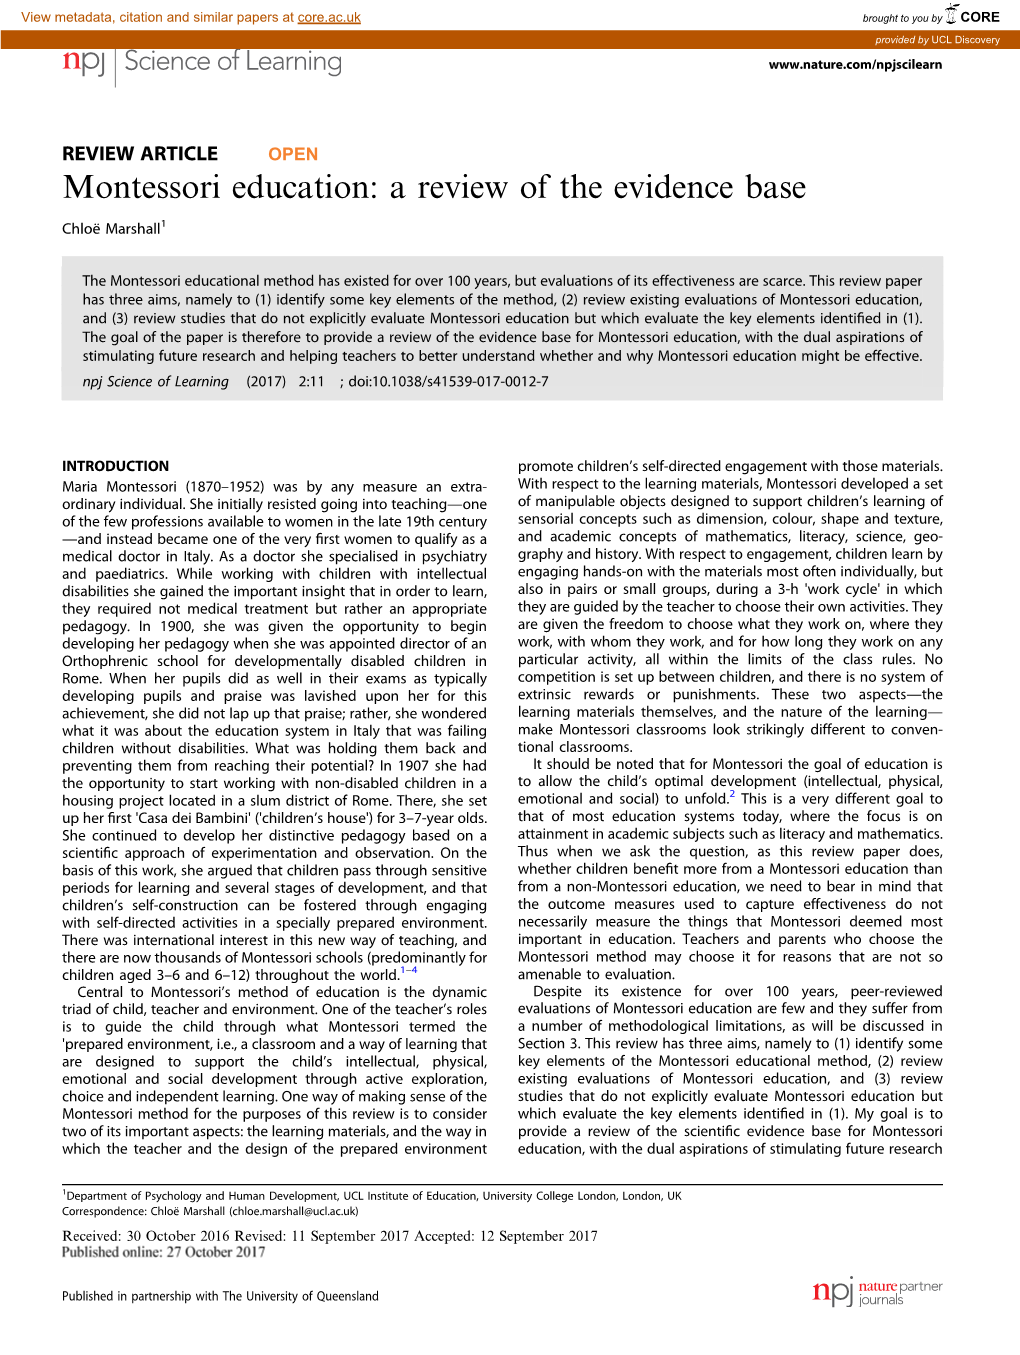 Montessori Education: a Review of the Evidence Base